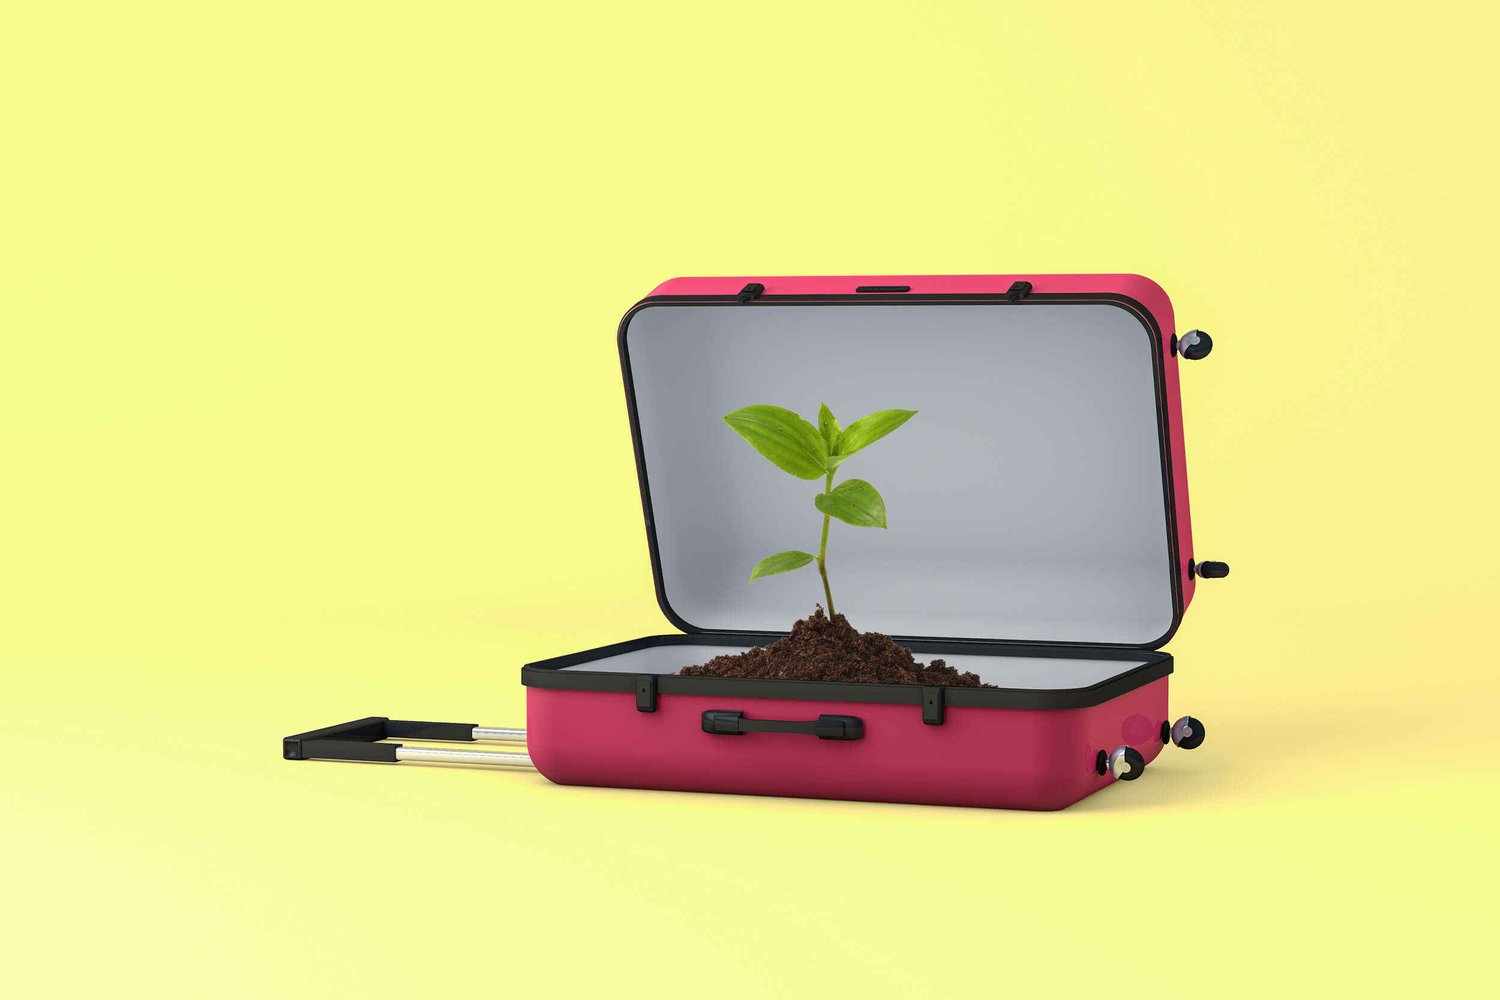 Open suitcase on wheels, lying on its back with soil and a green shoot in it